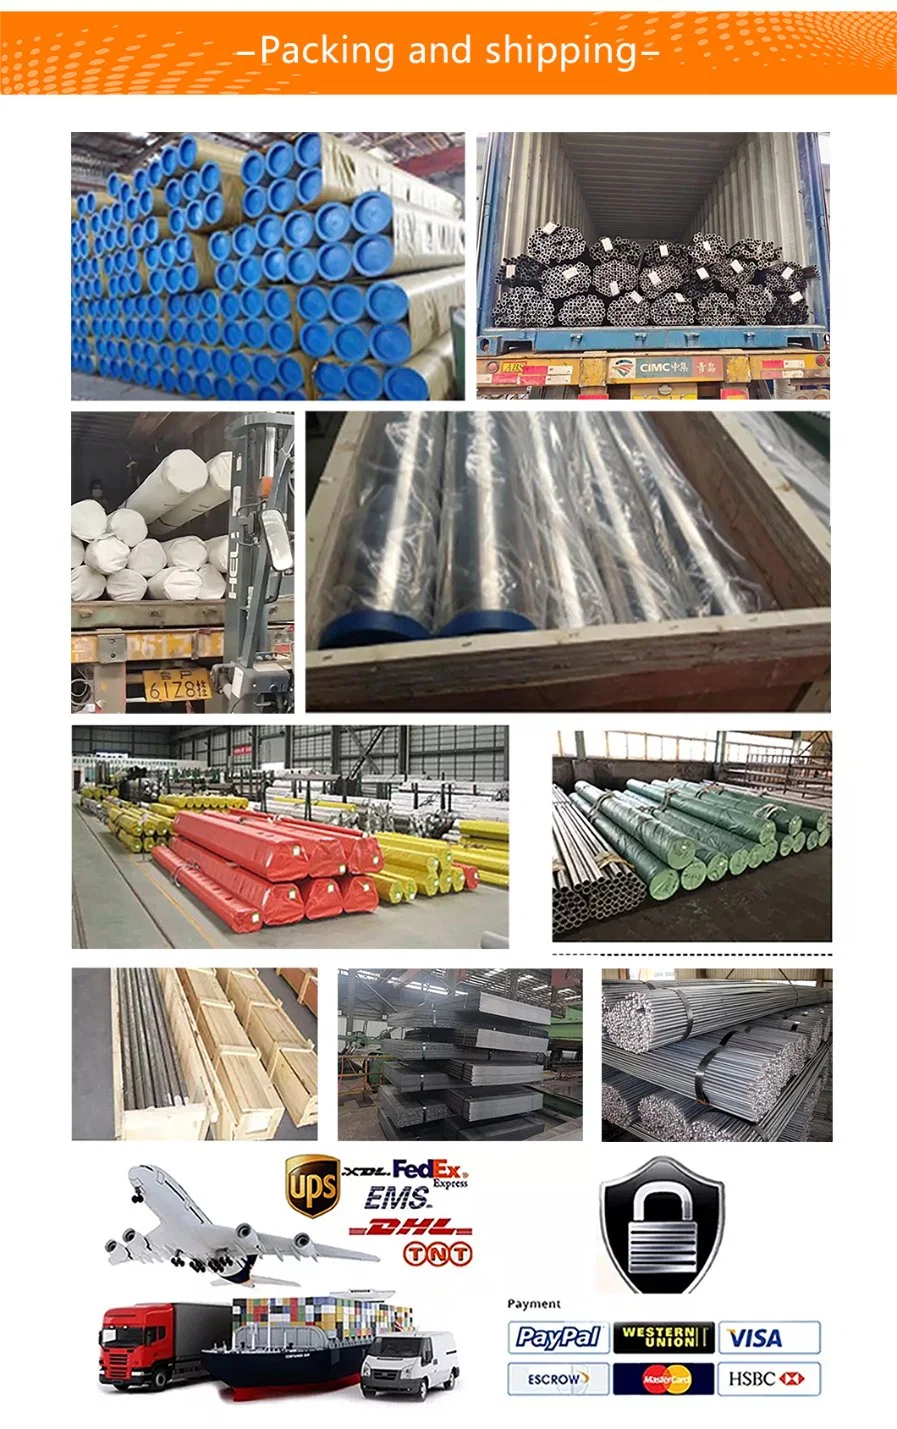 Carbon Steel/H-Shaped Steel/Carbon Steel Pipe/Seamless Steel Pipe/Special Shaped Pipe/Carbon Steel Plate/Building Materials/Alloy/Factory/Q235B/Hot Rolled